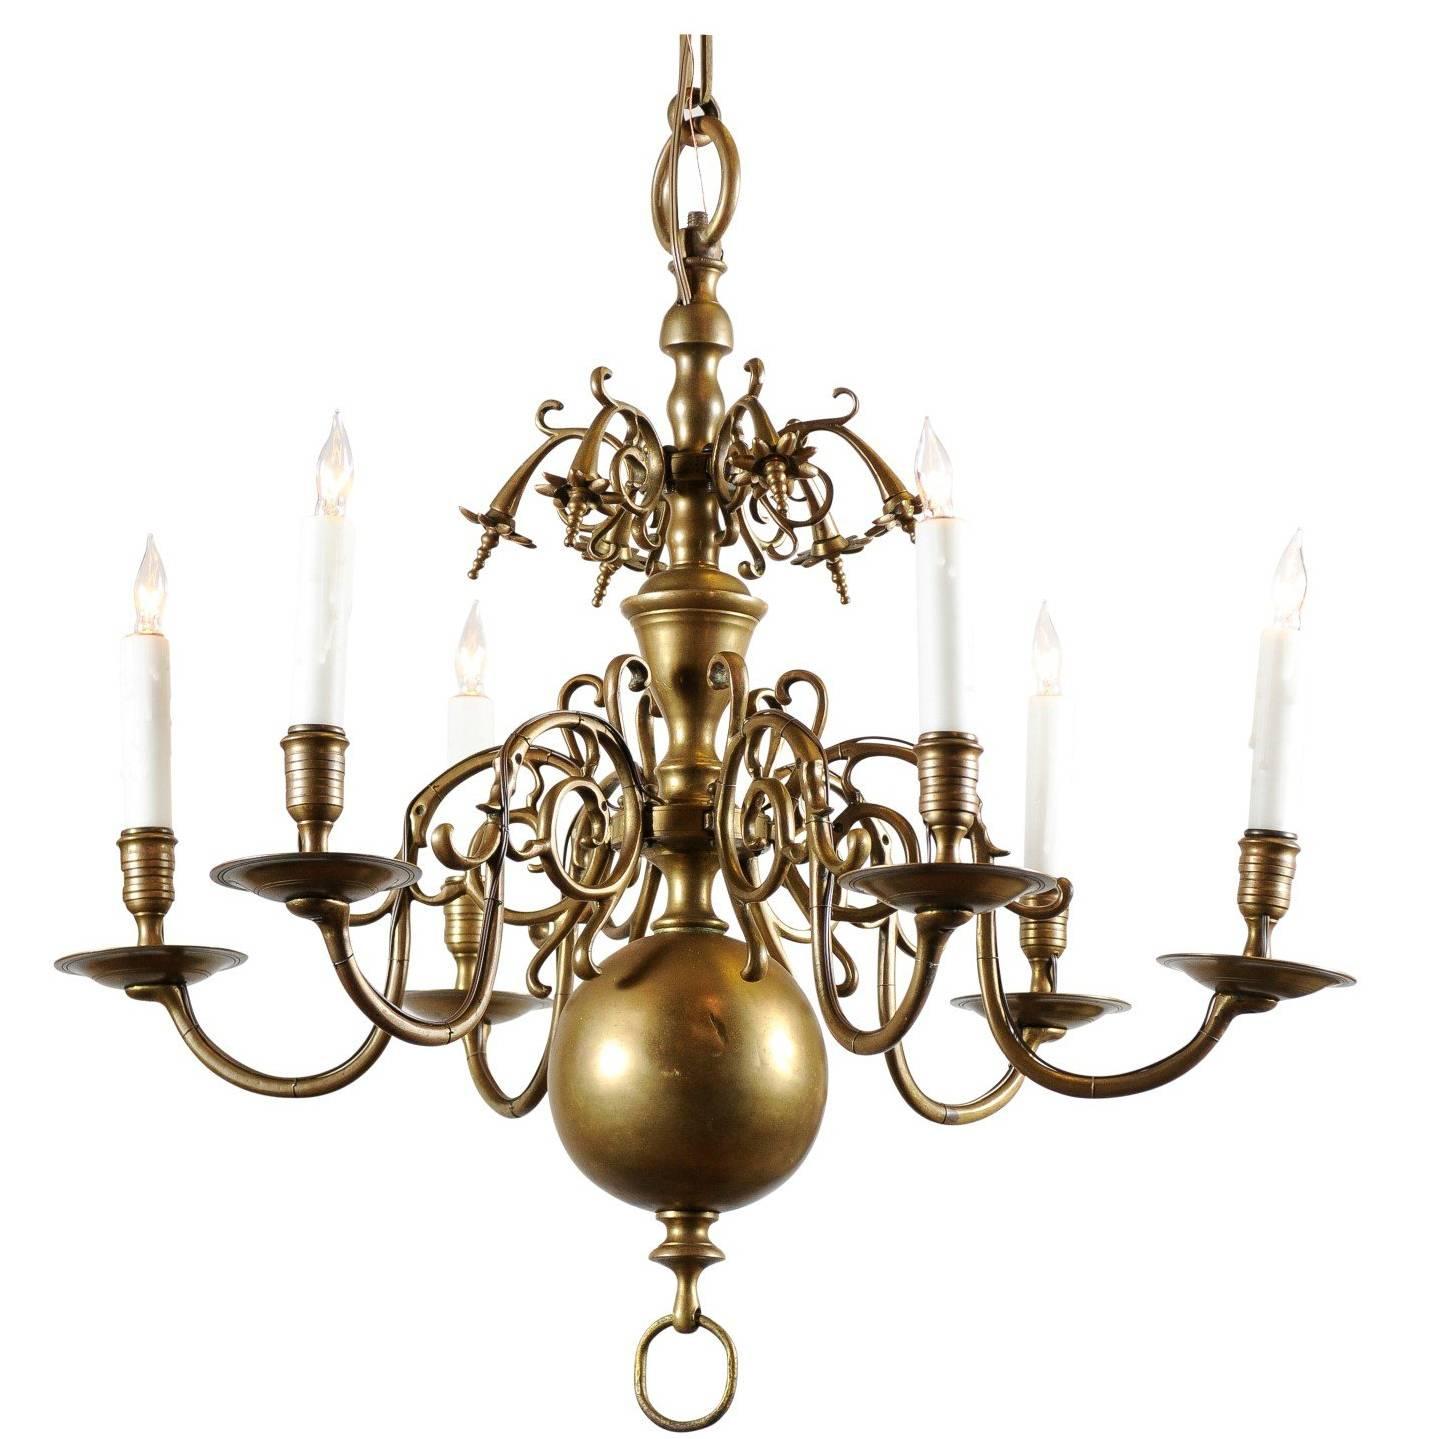 Small Dutch Brass Chandelier with Six Lights, Early 19th Century